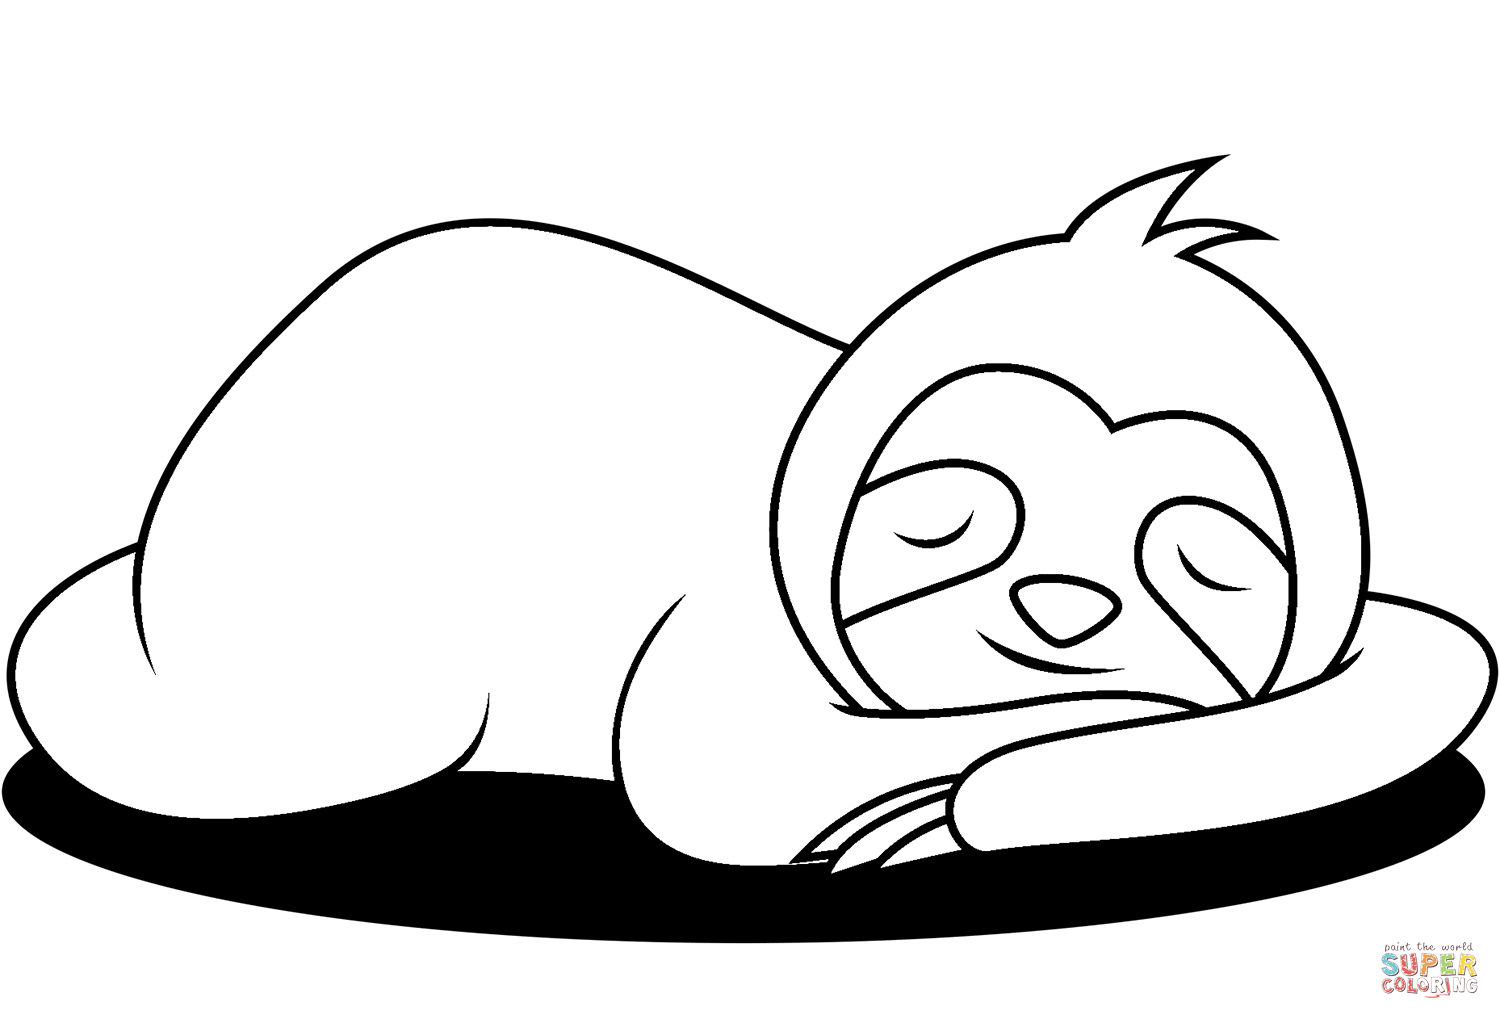 Sleeping sloth coloring page free printable coloring pages